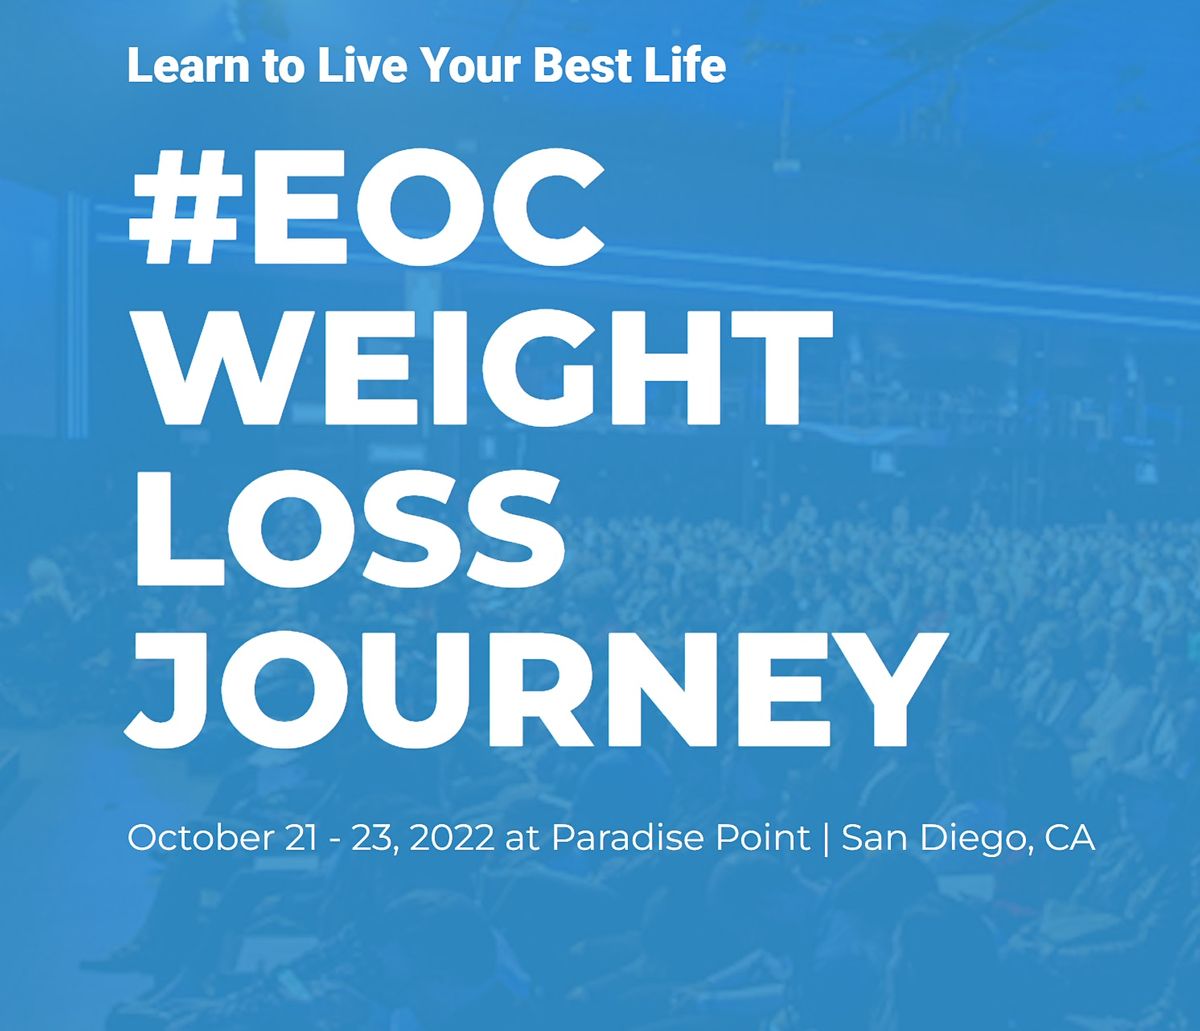 EOC Weight Loss Journey 2022 Conference